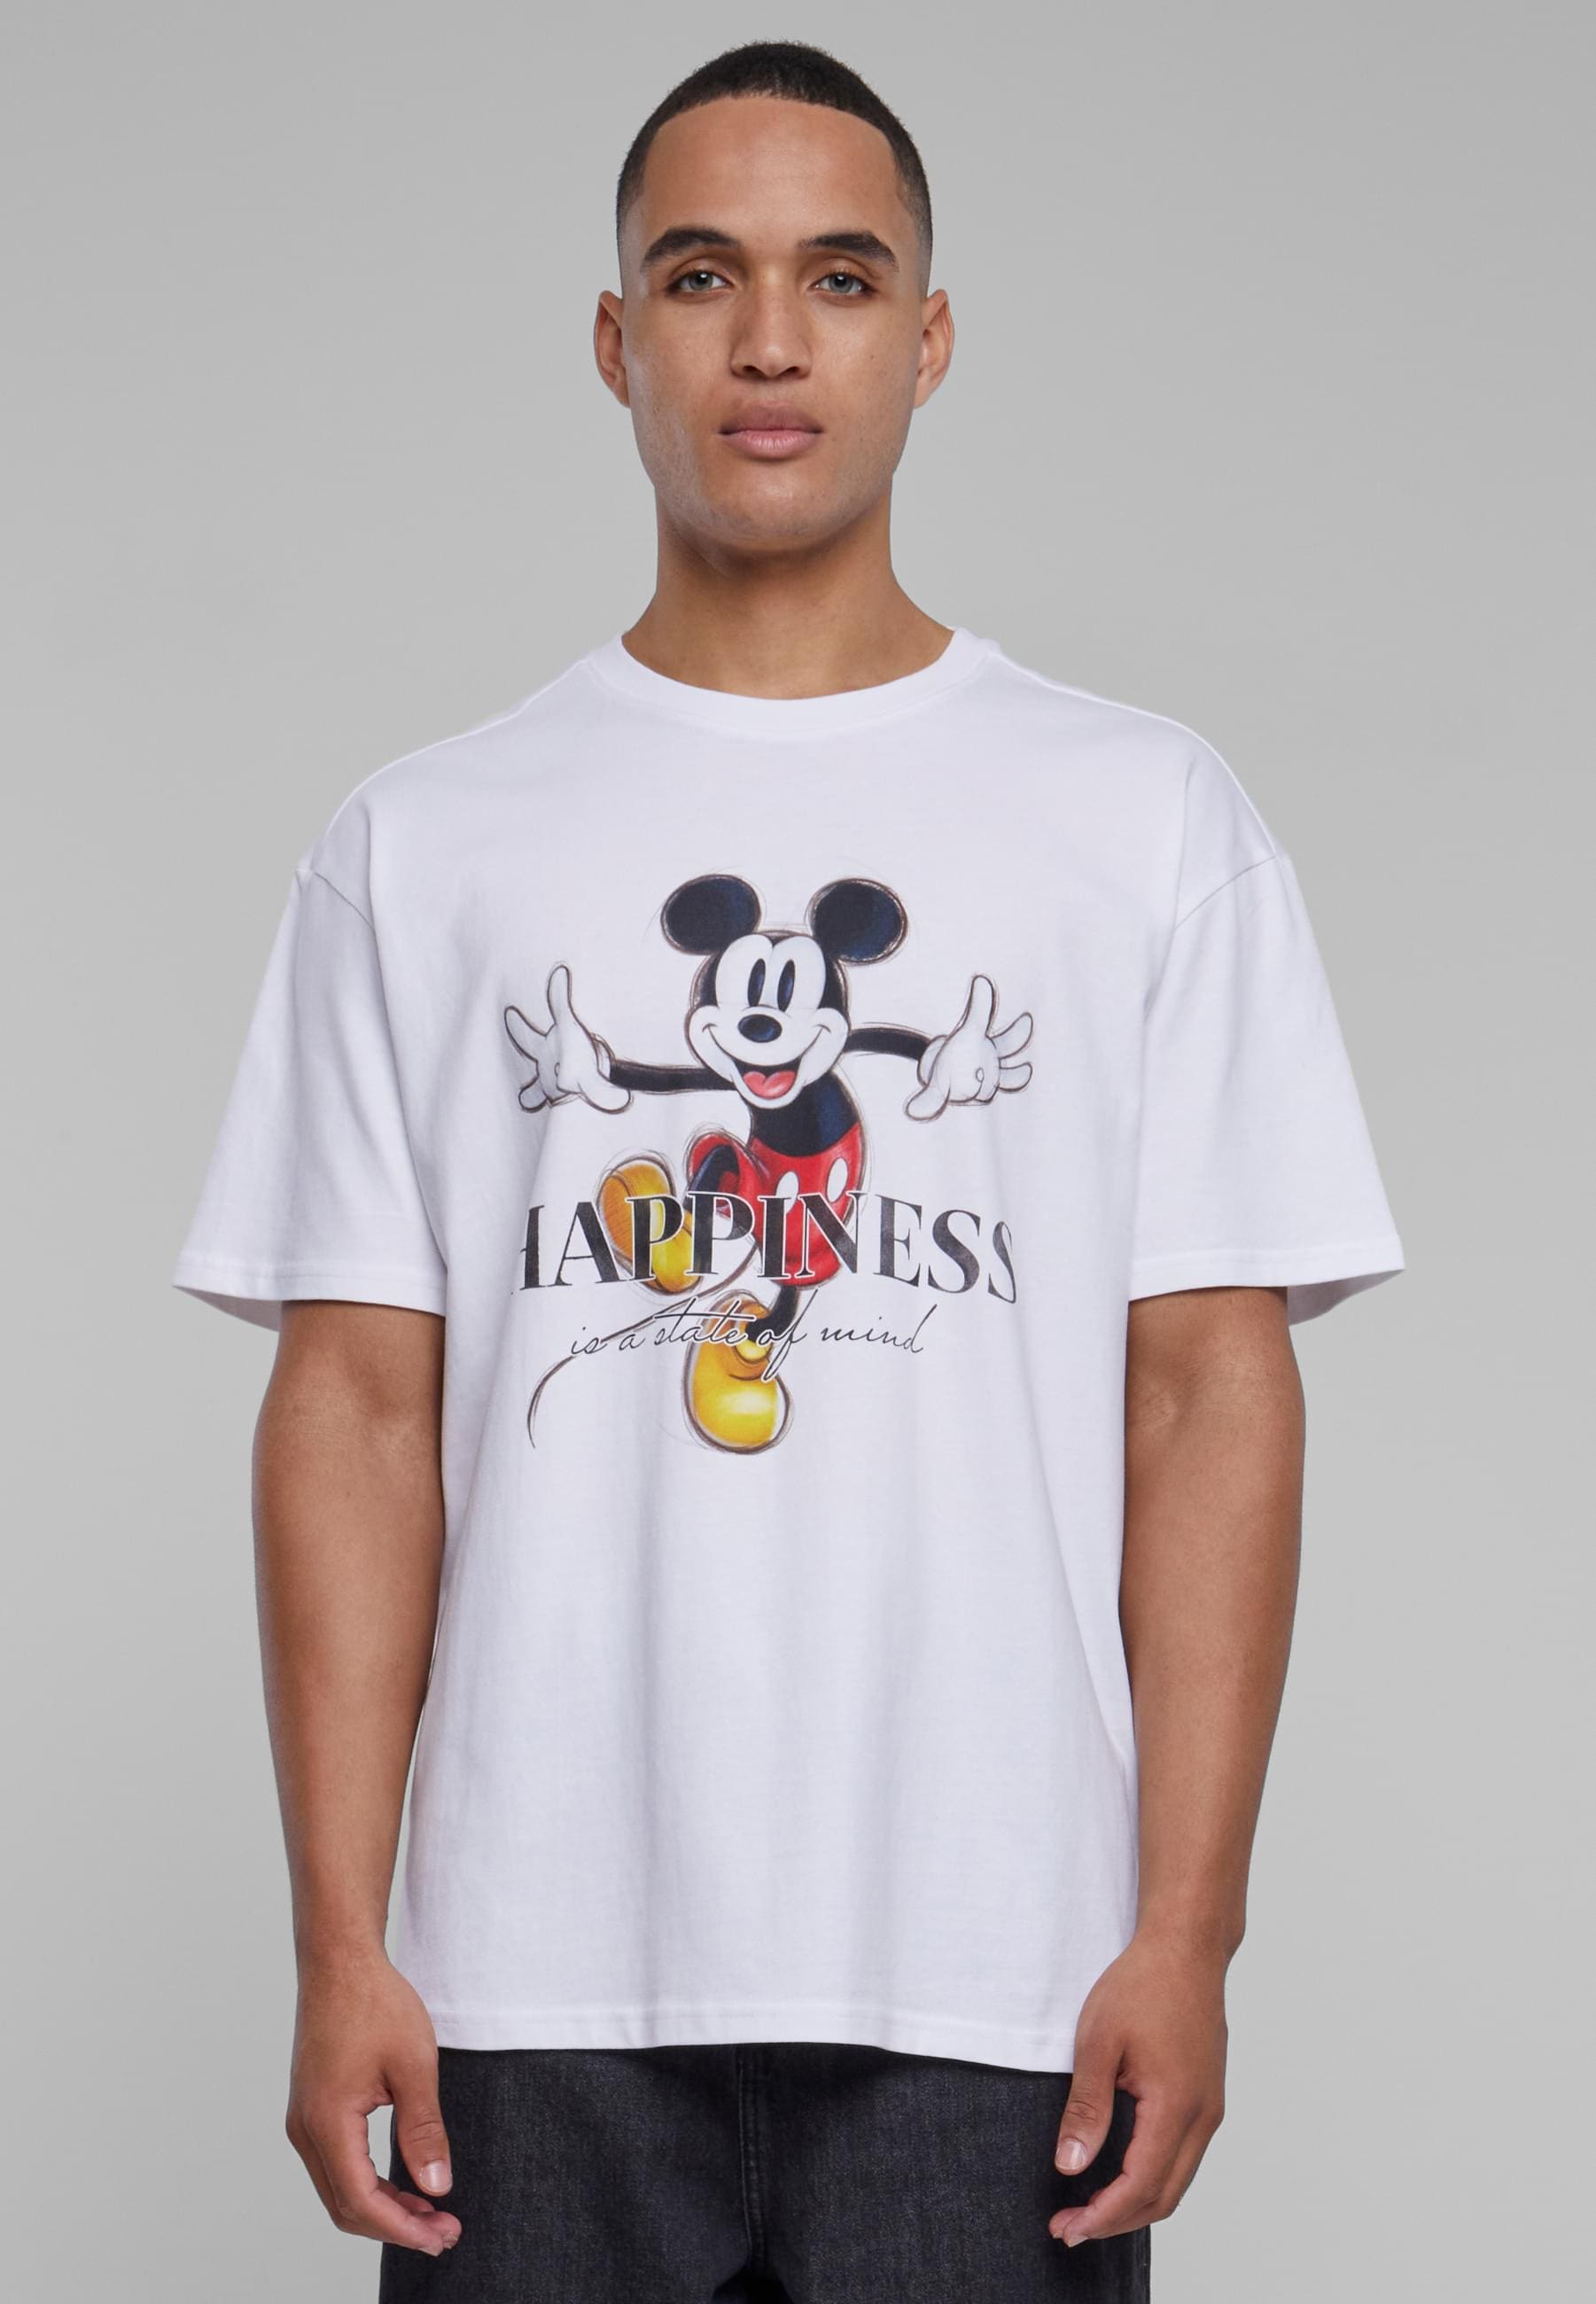 Upscale by Mister Tee T-Shirt tlg.) | Oversize BAUR Mickey 100 online »Unisex Happiness Tee«, Disney kaufen (1